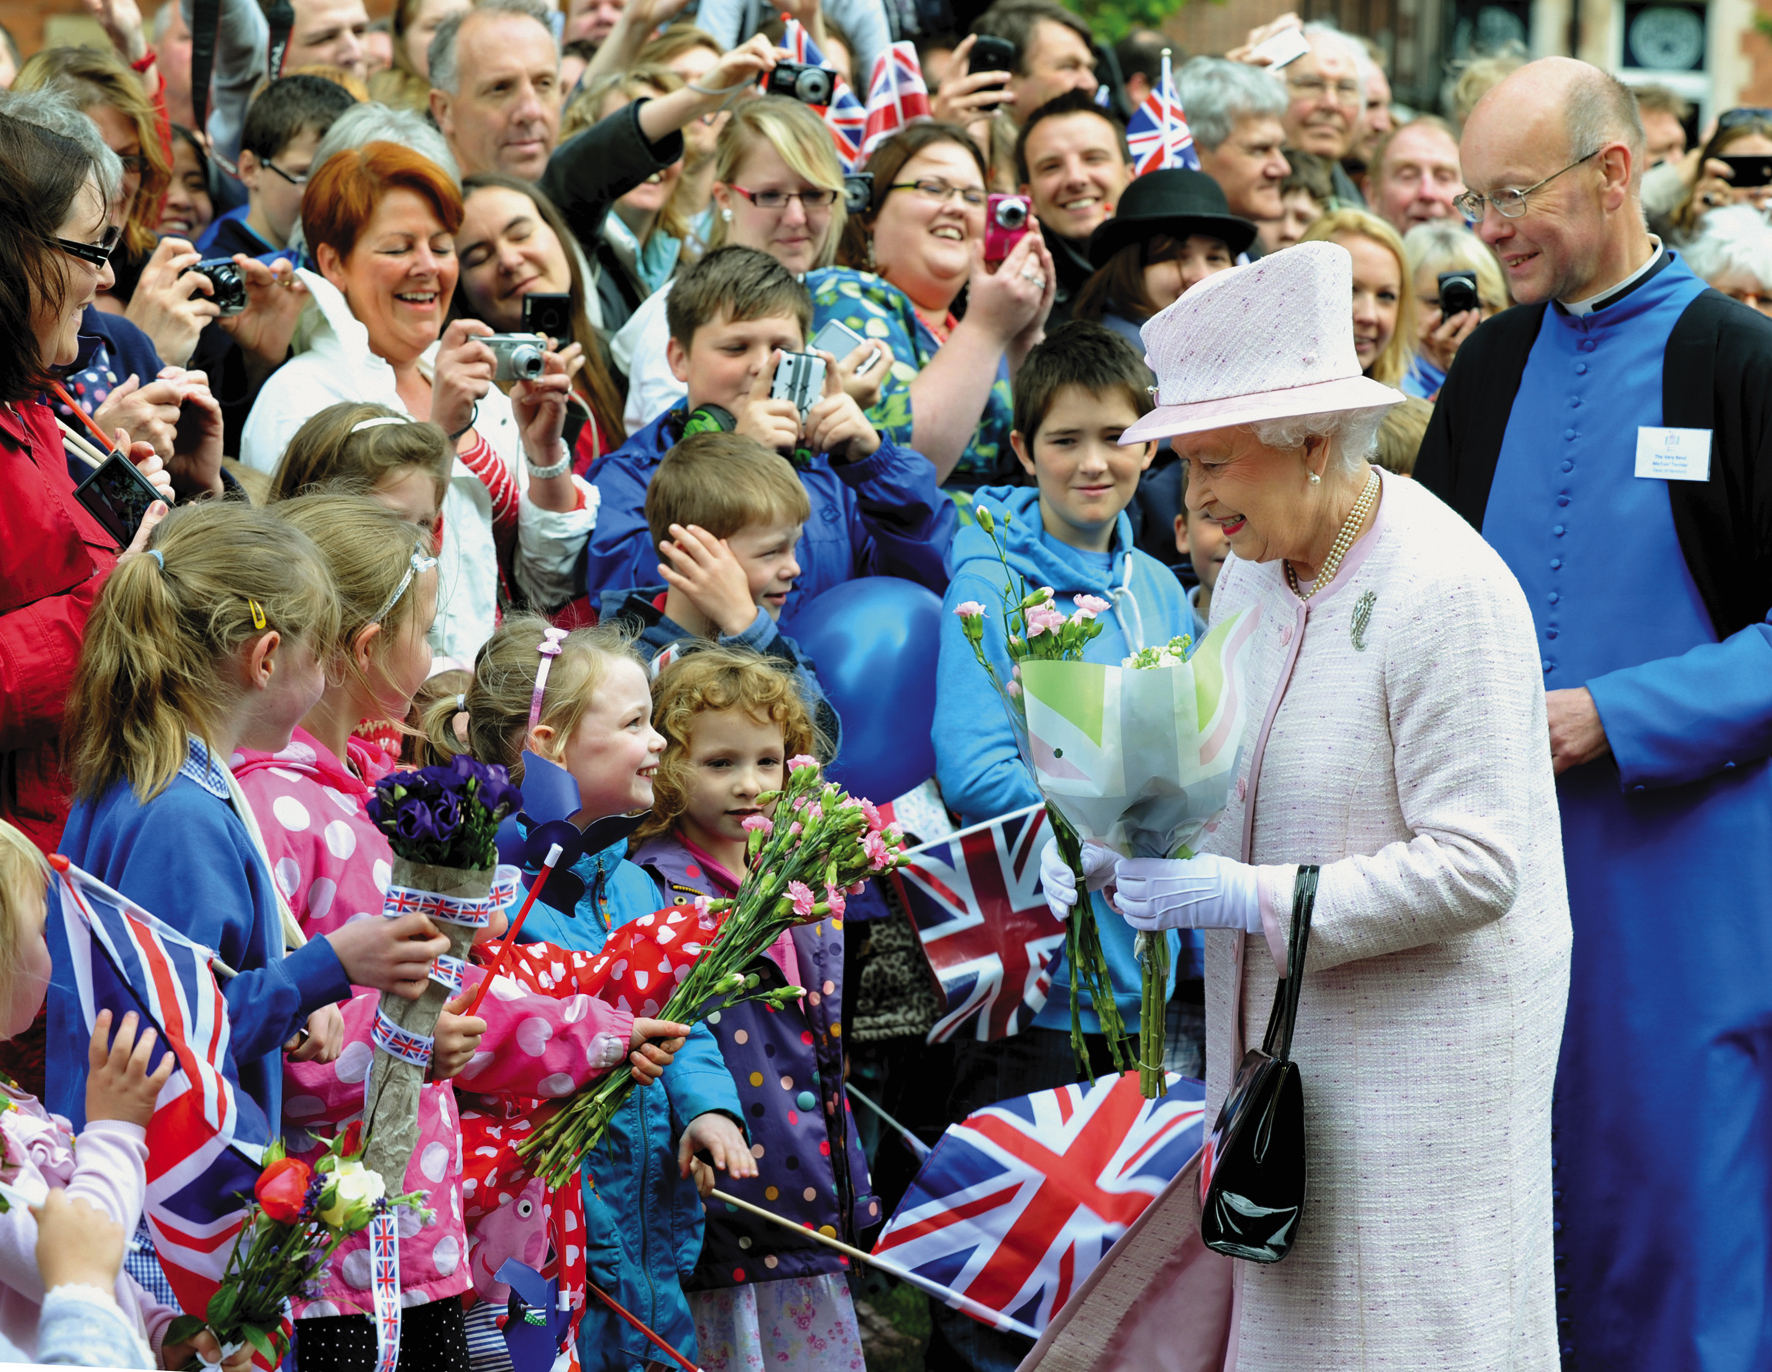 Queen Elizabeth II & Prince Philip visit to Hereford as part of her diamond jubilee tour, 2012. The Queen accepts bouquets of flowers from youngsters at Hereford Cathedral yesterday (Wed)...Photo Chas Breton..